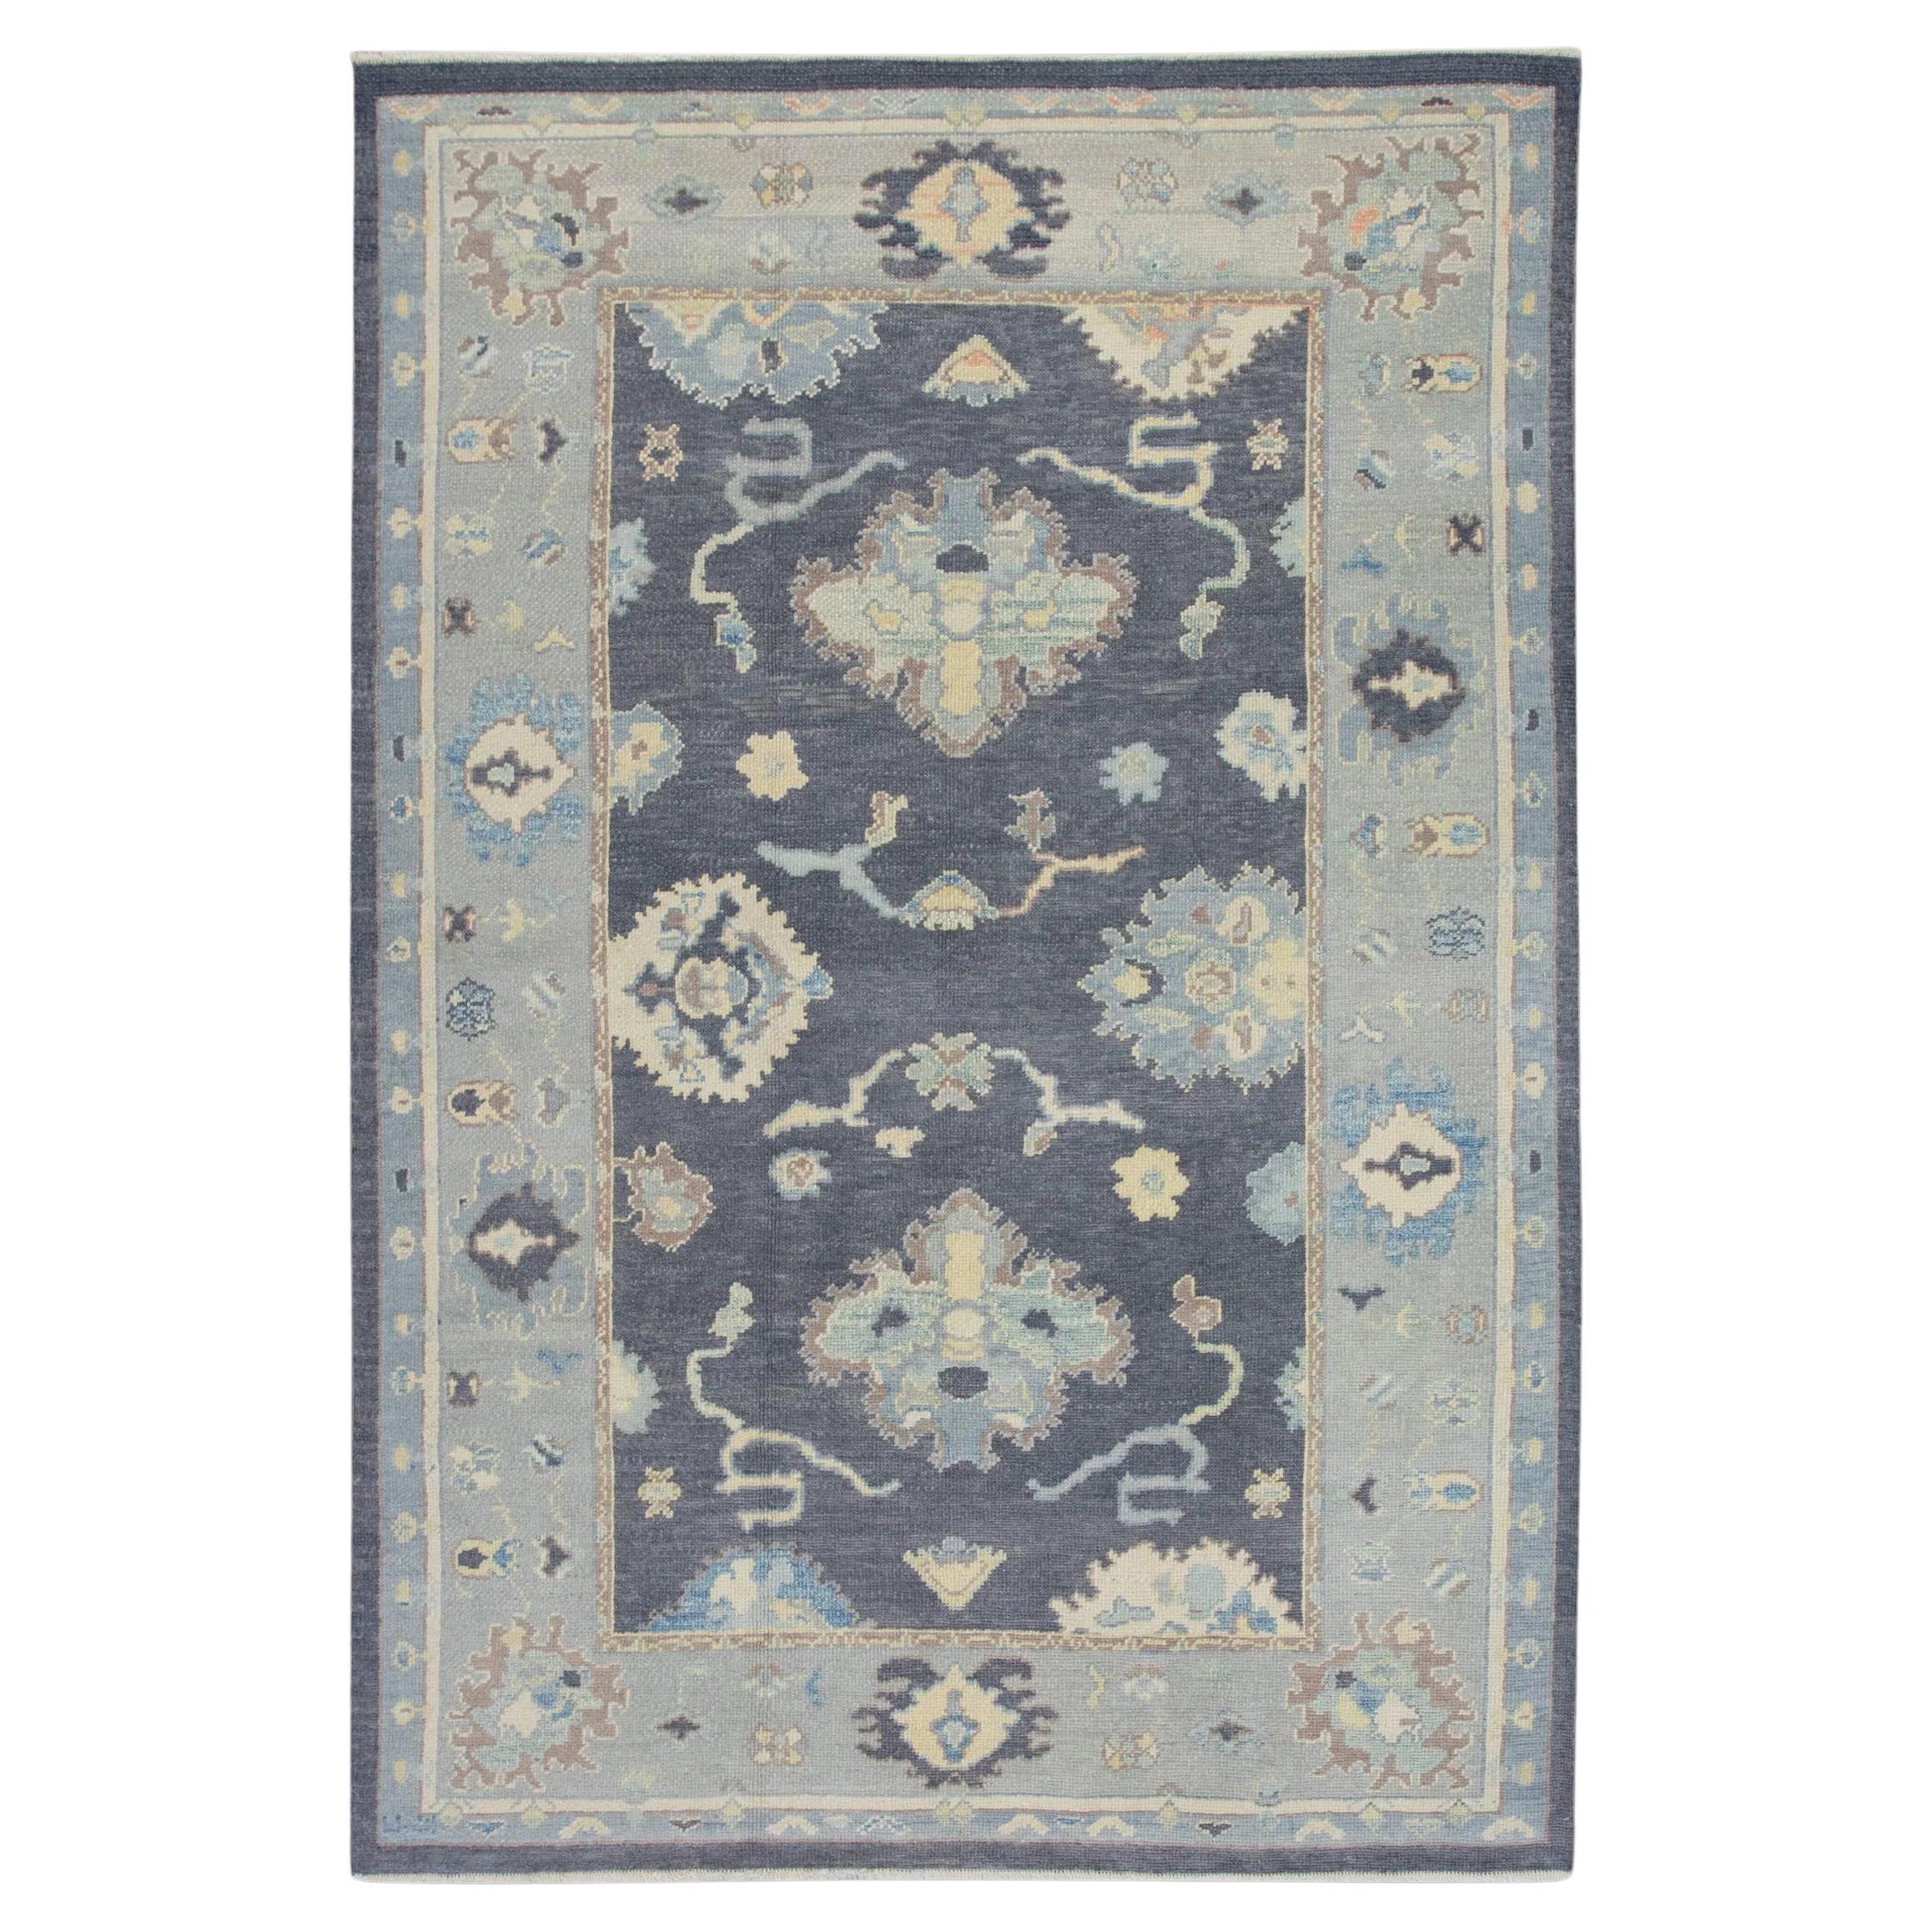 Blue Handwoven Wool Turkish Oushak Rug in Colorful Floral Design 6'3" x 9'